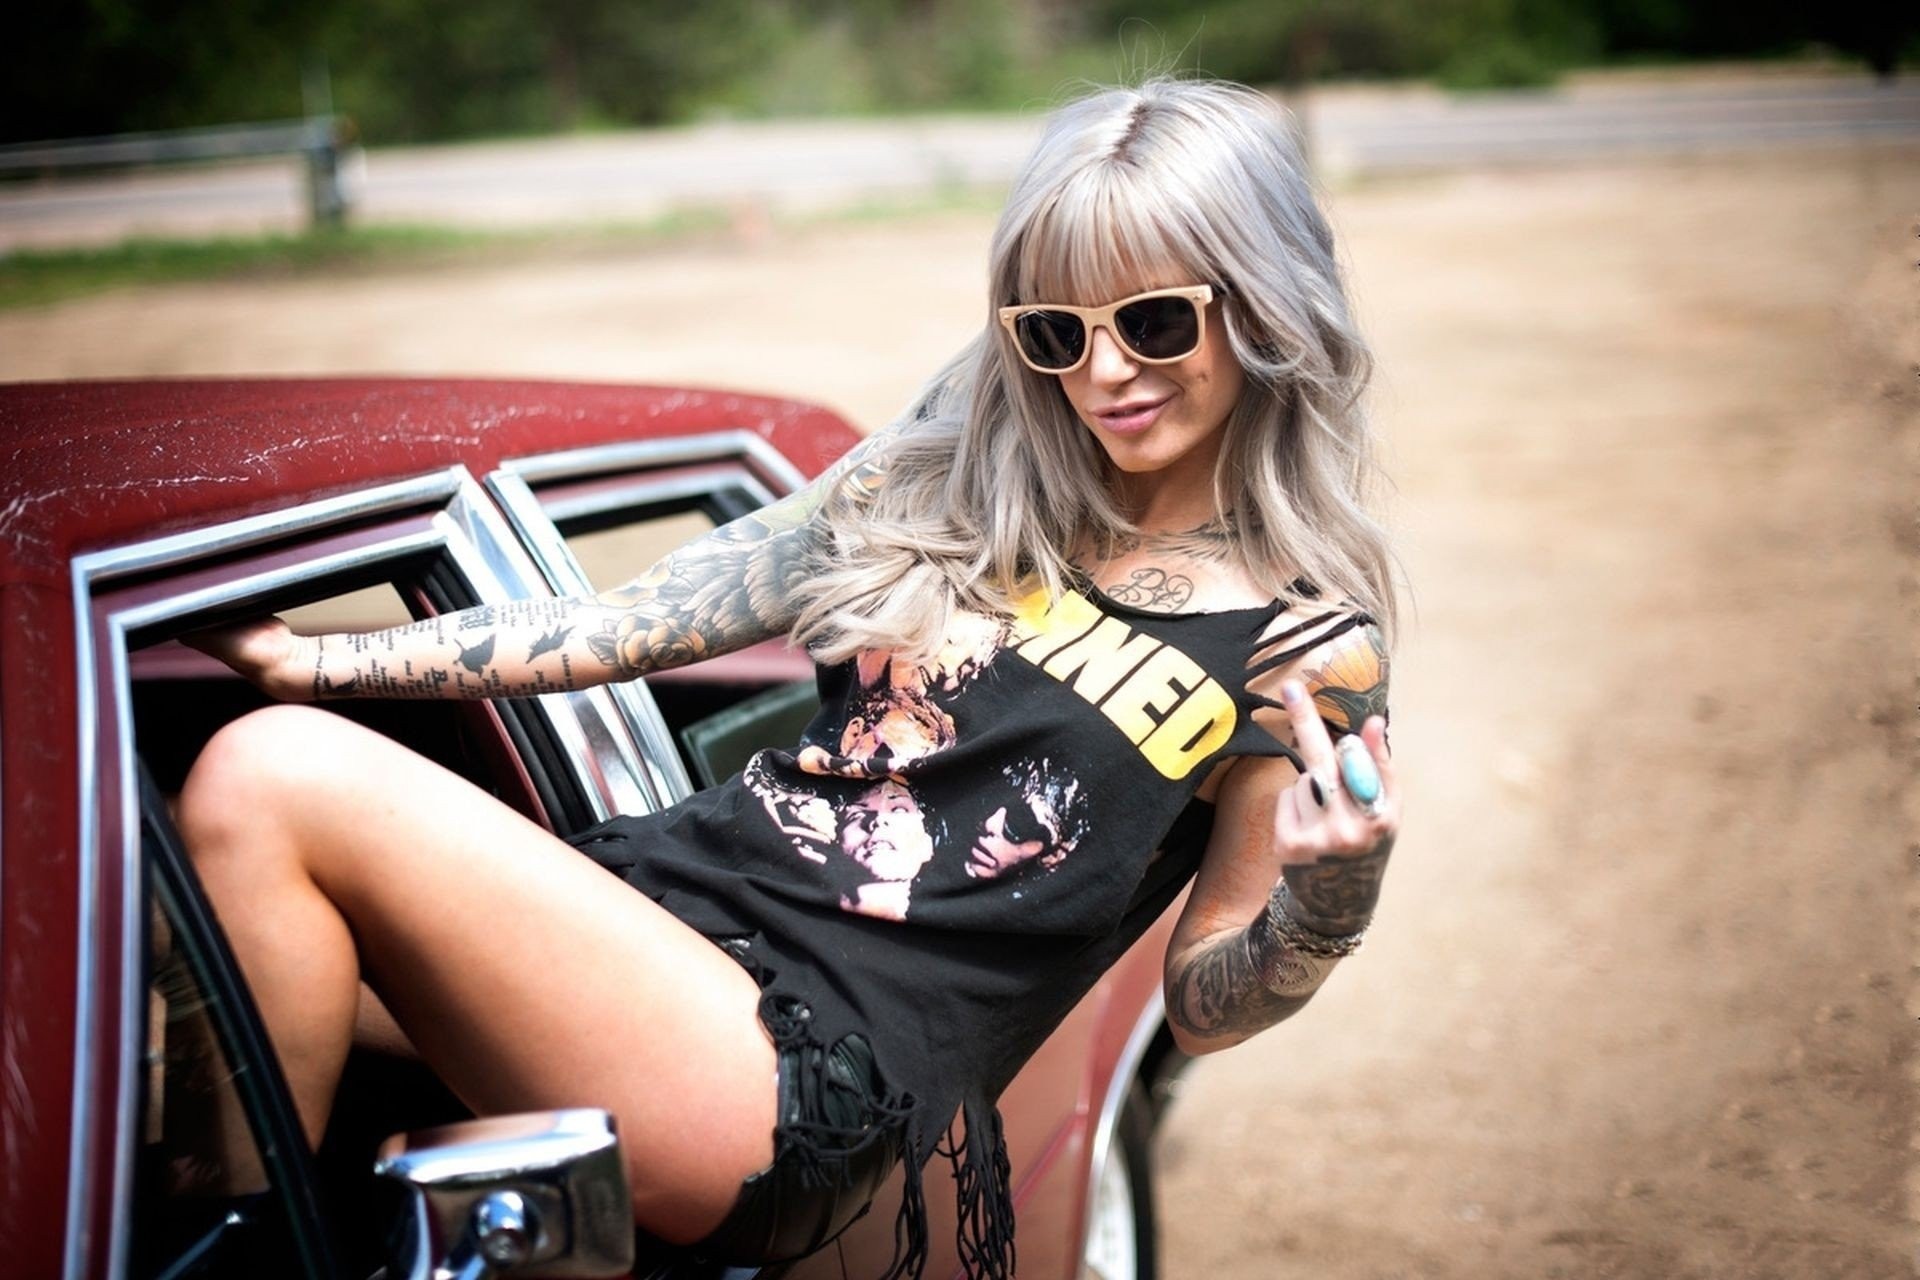 People 1920x1280 women dyed hair jean shorts leaning tattoo middle finger women outdoors red cars car punk punk rock album covers alternative subculture vehicle women with shades sunglasses printed shirts inked girls thighs smiling obscene hand gesture pink lipstick